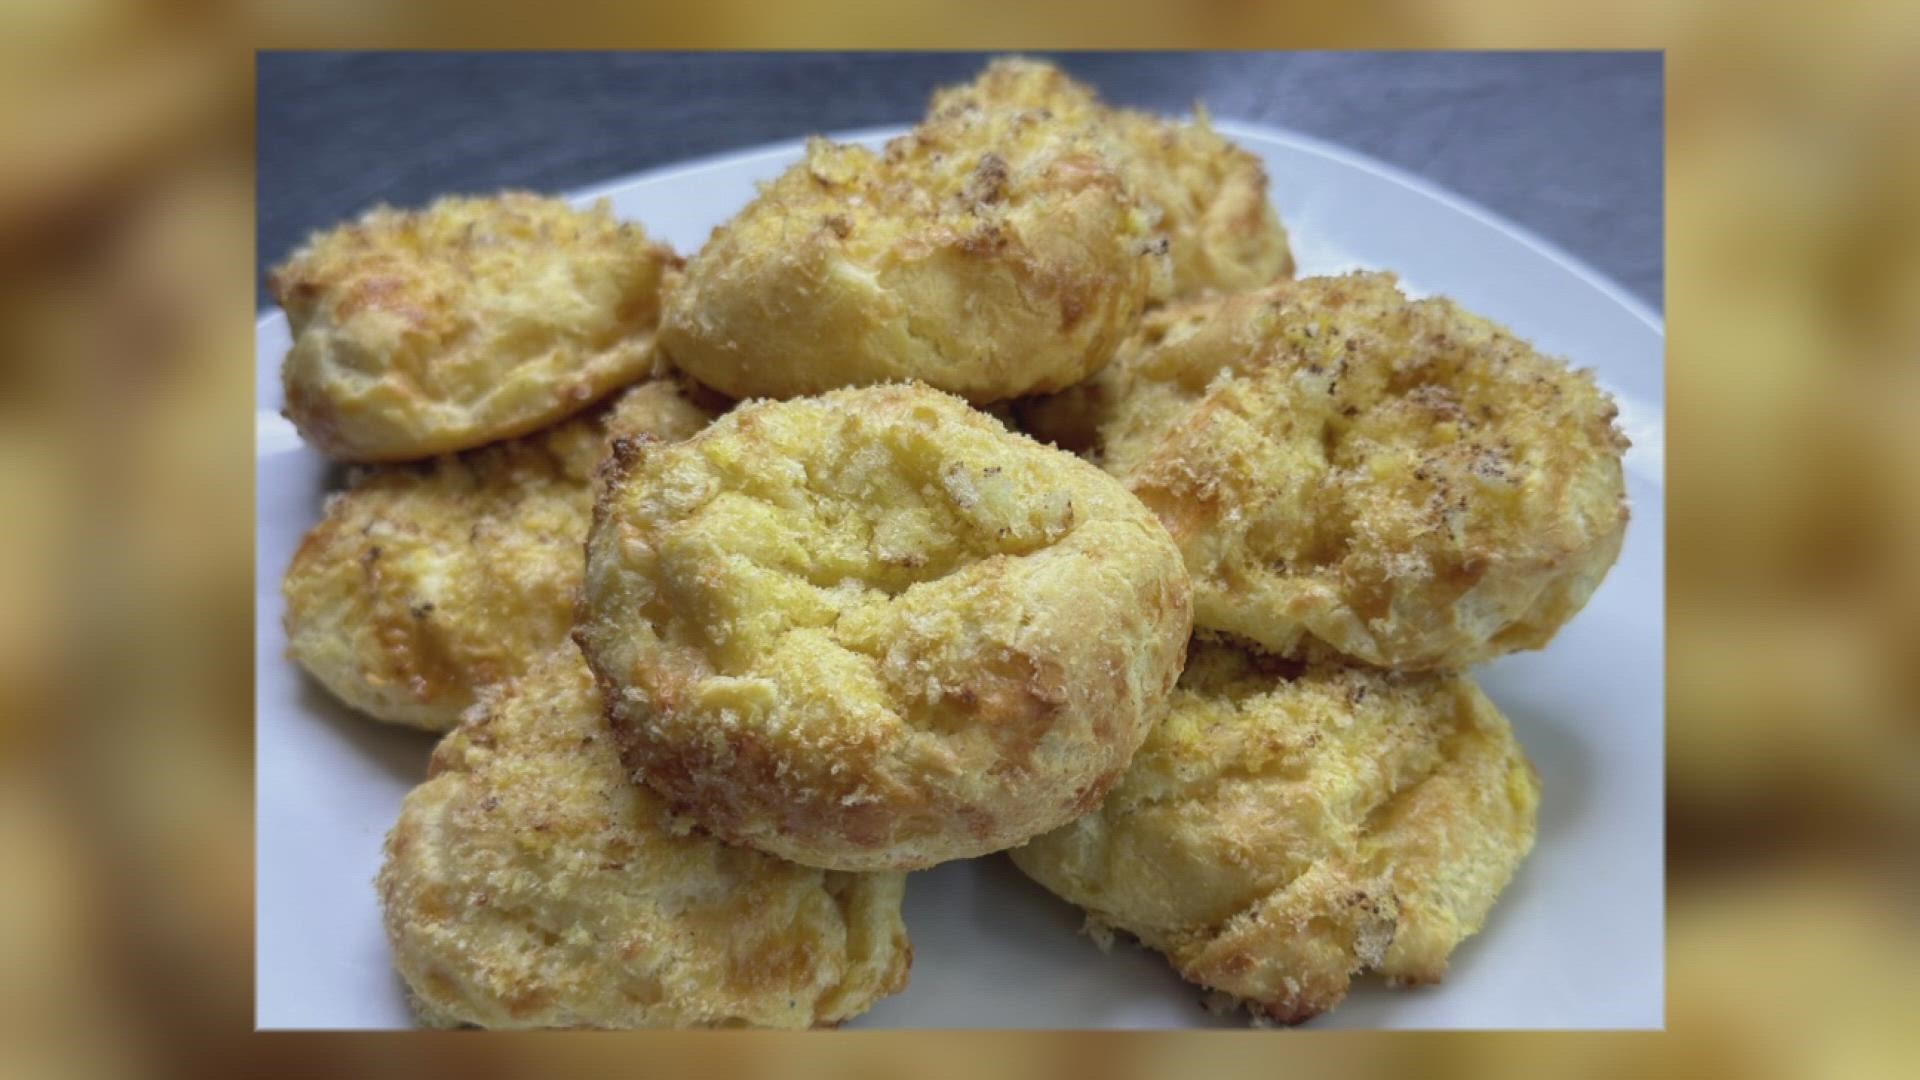 It's National Cheese Doodle Day! 10TV's Brittany Bailey takes you through how to make the tasty, cheesy treat for yourself.